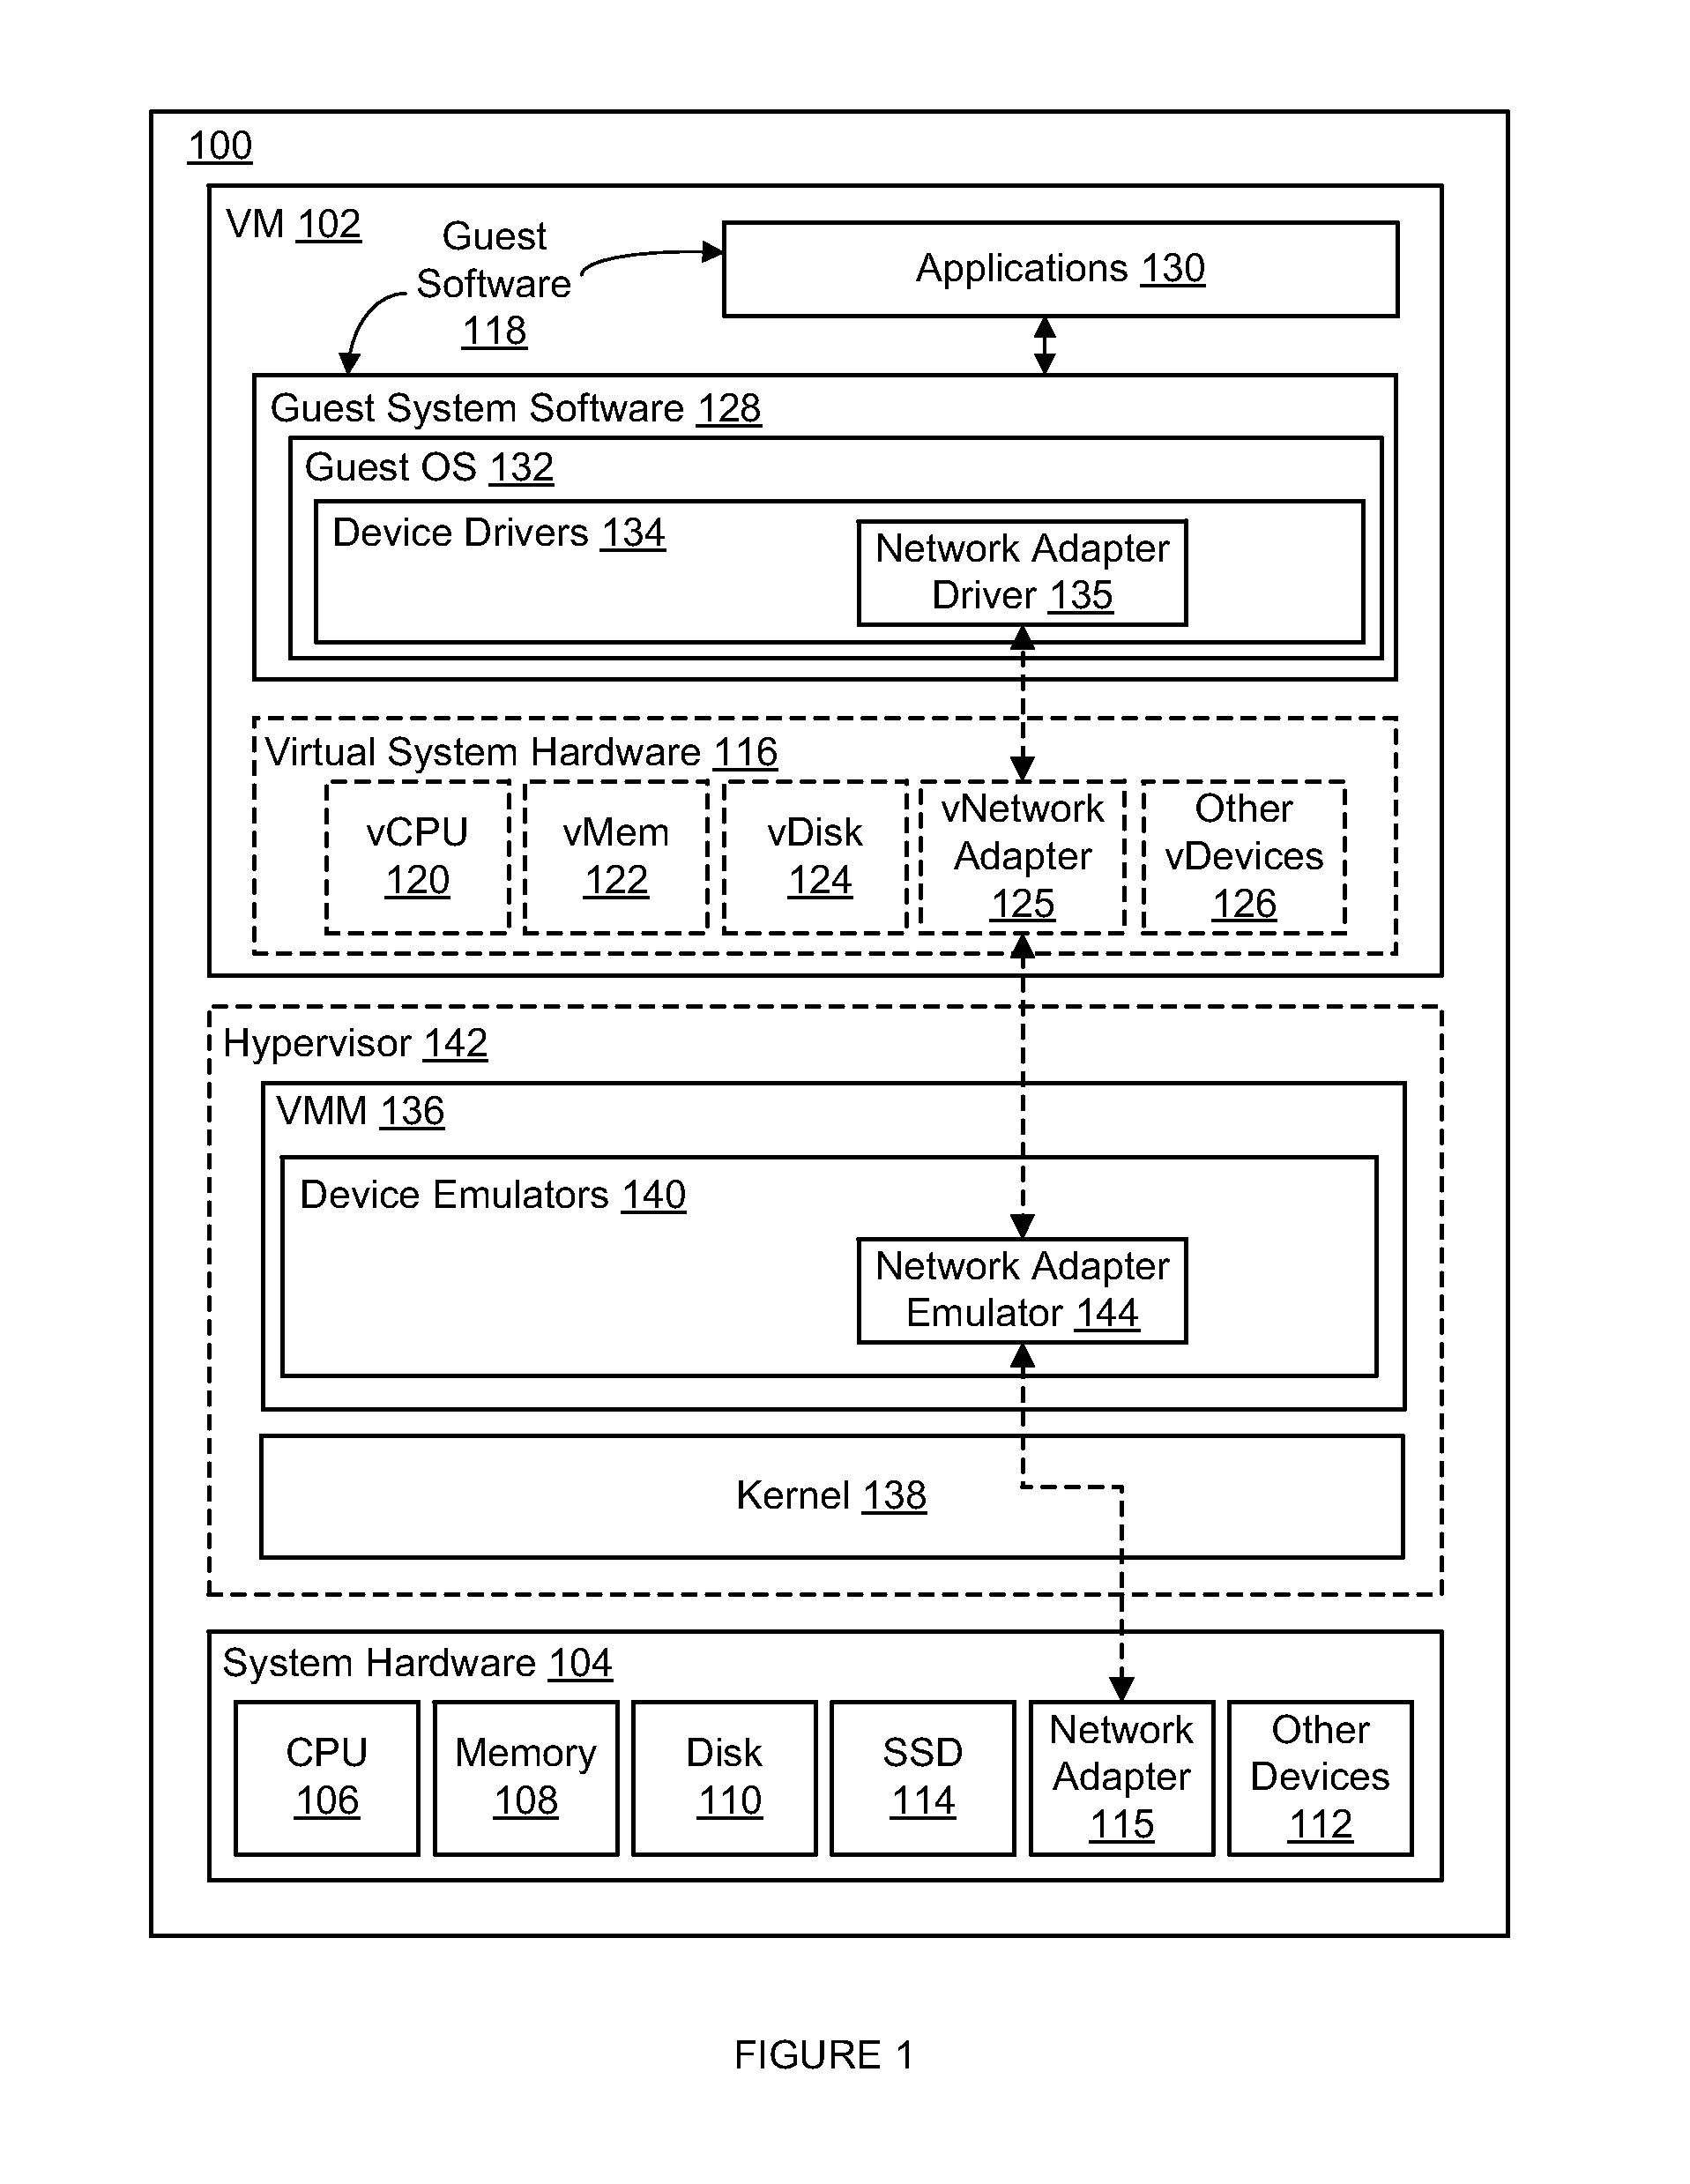 Efficient overcommitment of main-memory based virtual database system to disk